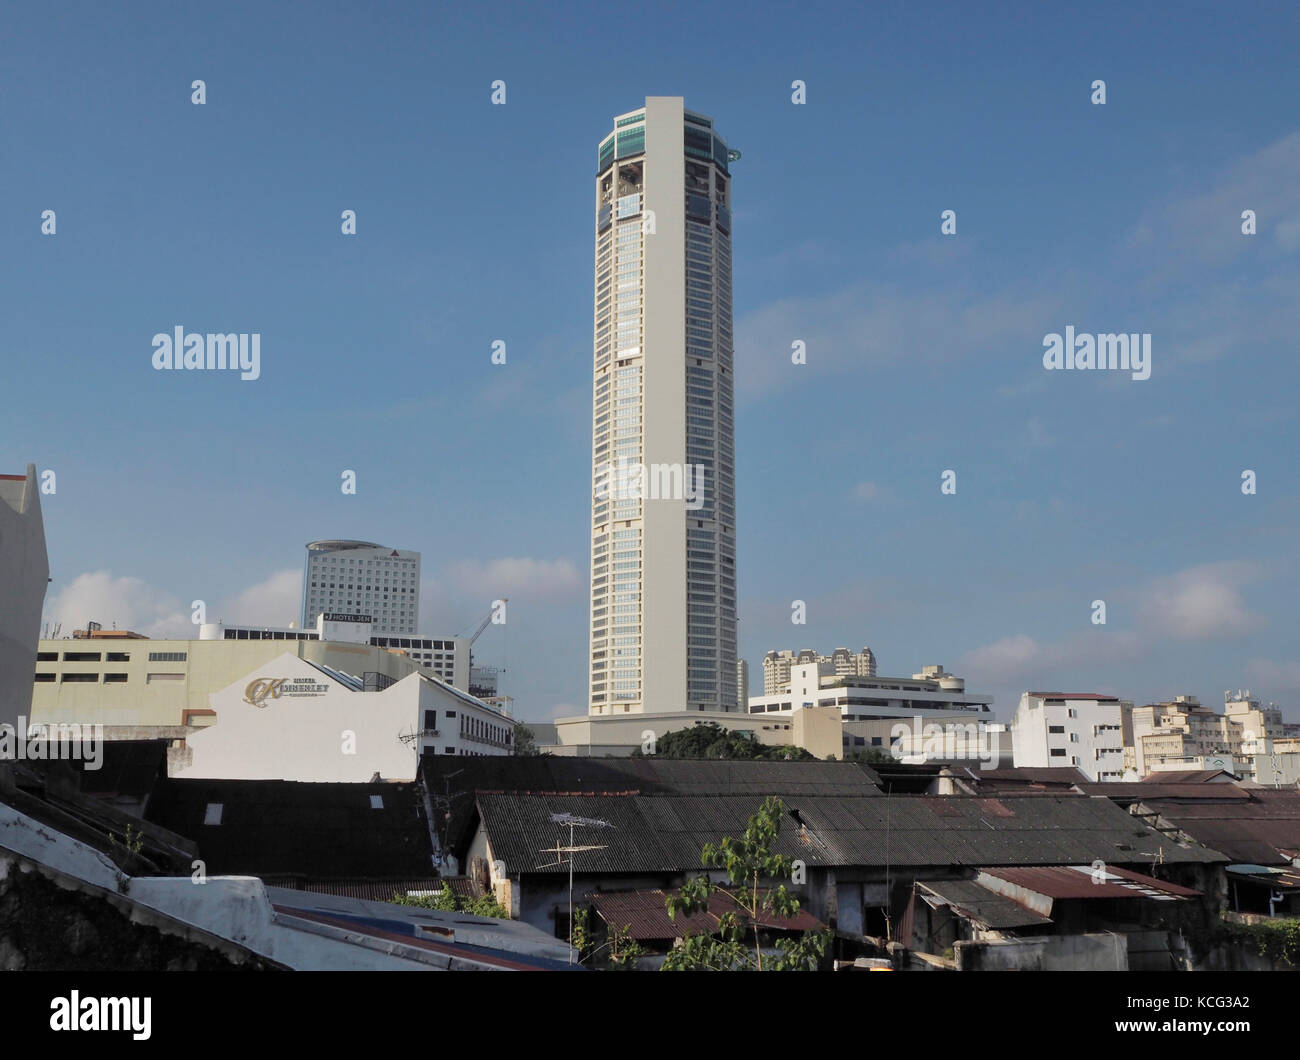 Komtar Tower in Penang, Malaysia. On the foreground are old traditional buildings. Stock Photo